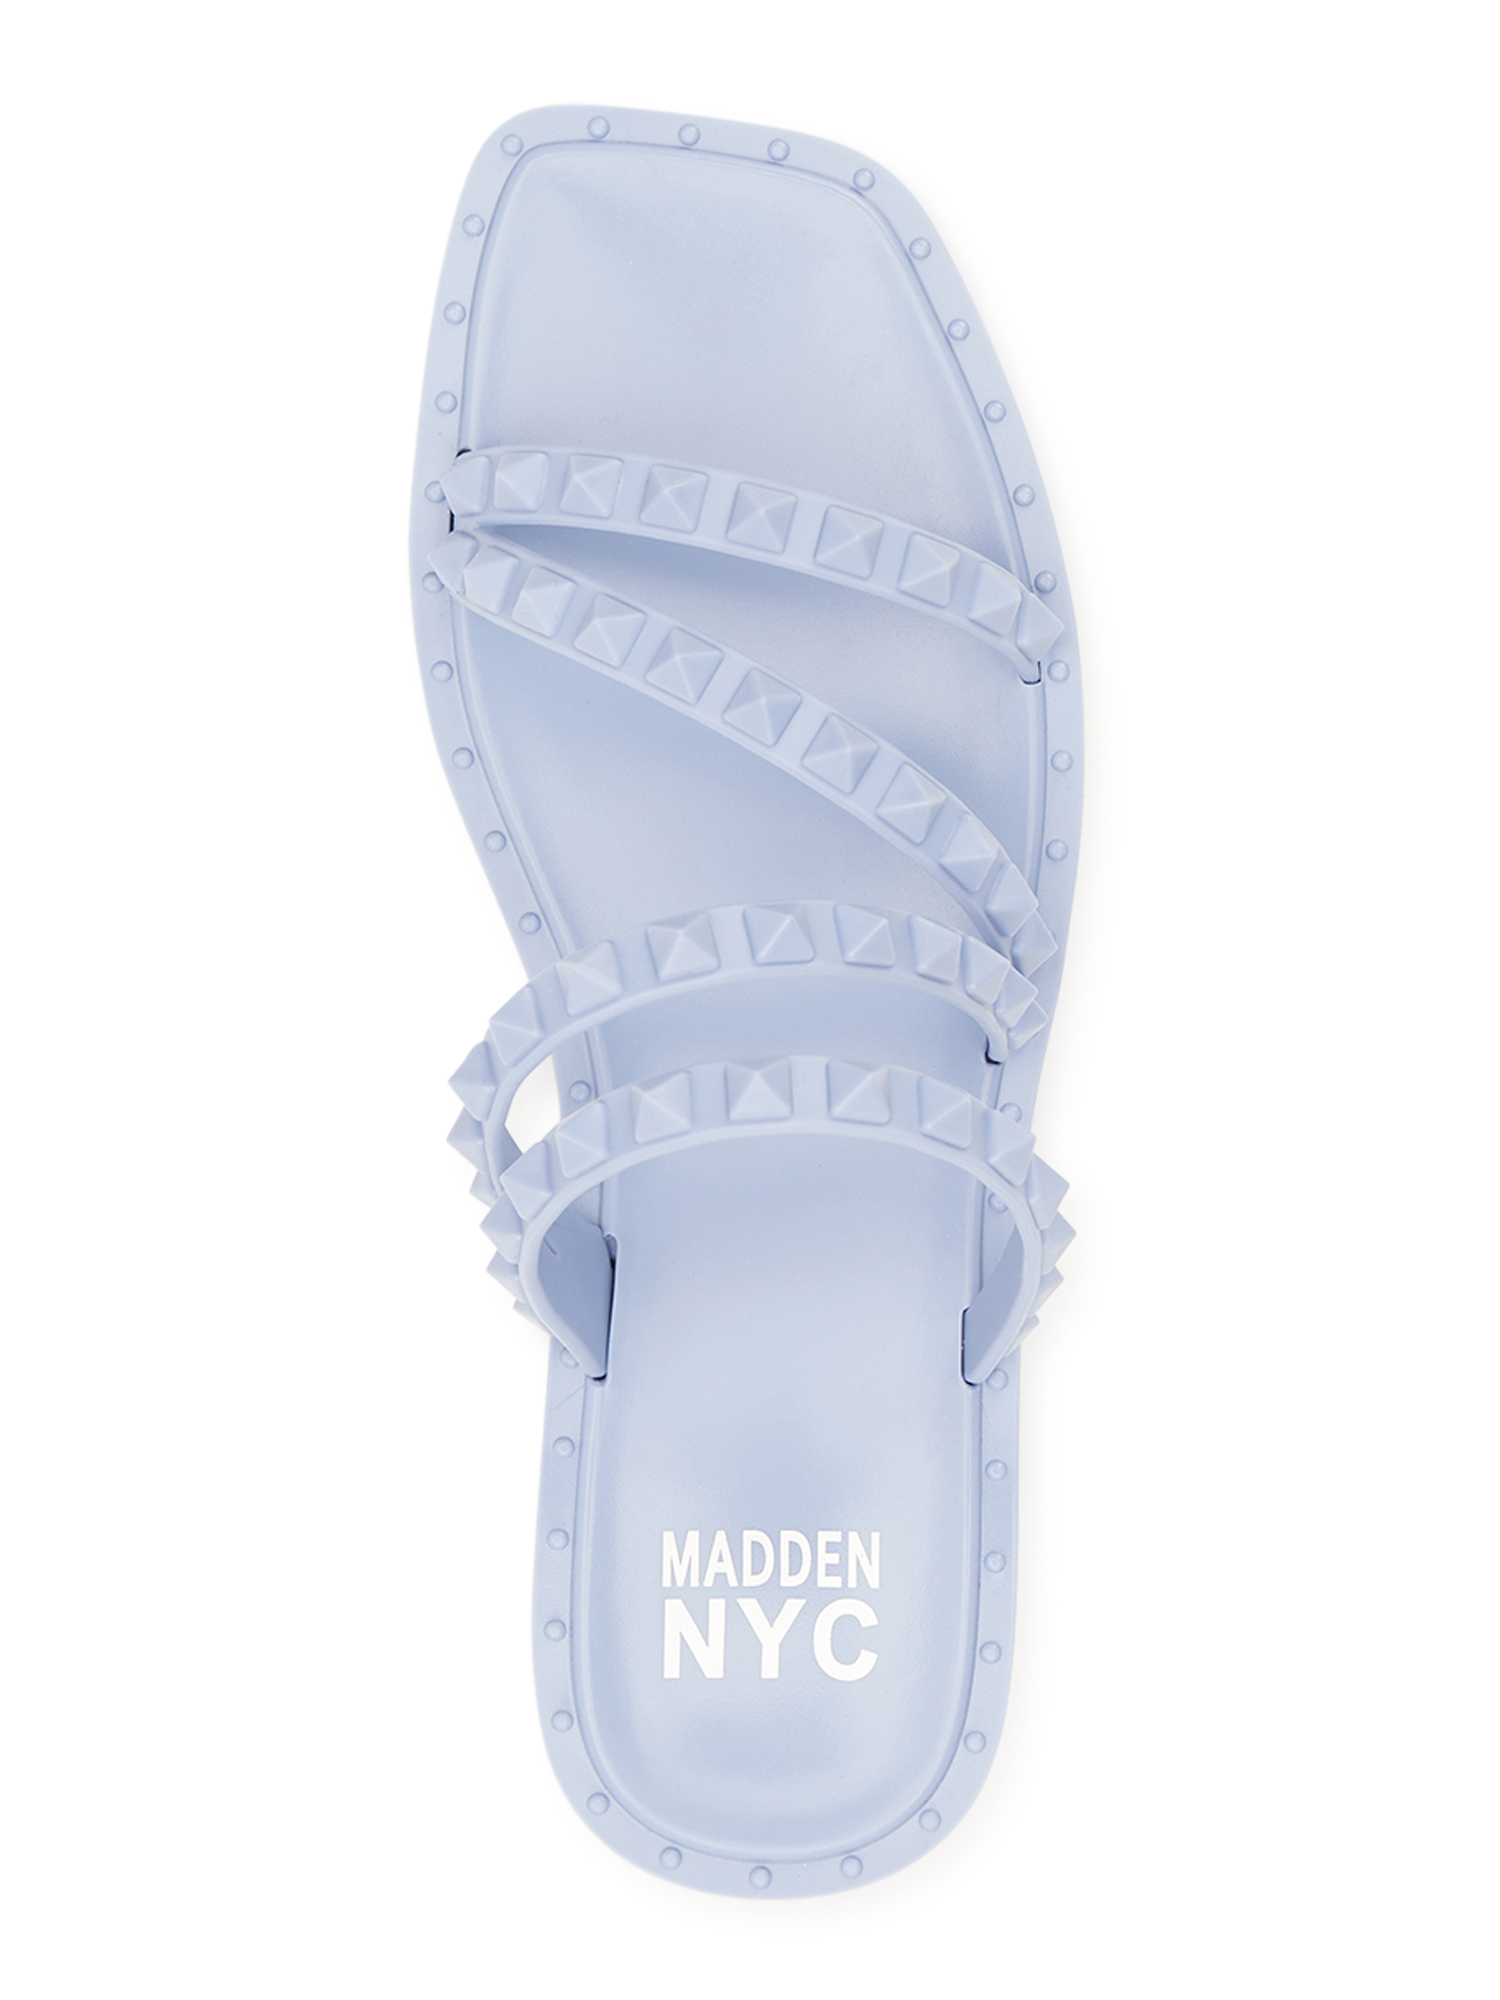 Madden NYC Women's Studded Strappy Jelly Slide Sandals - image 4 of 5